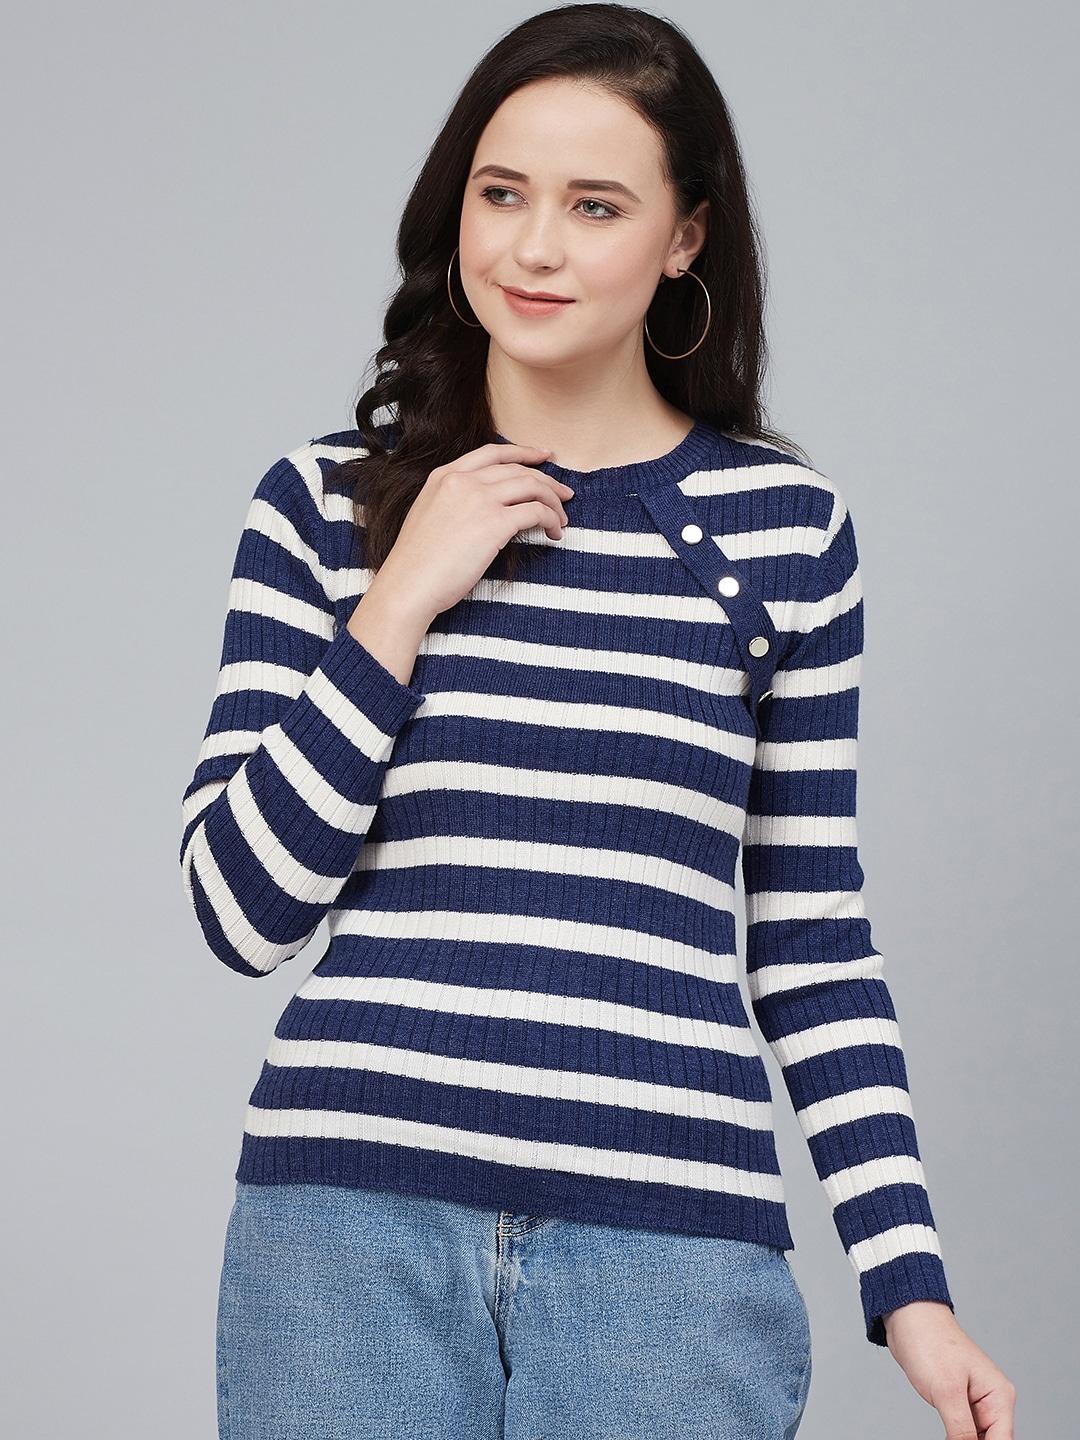 cayman women navy blue & white striped pullover